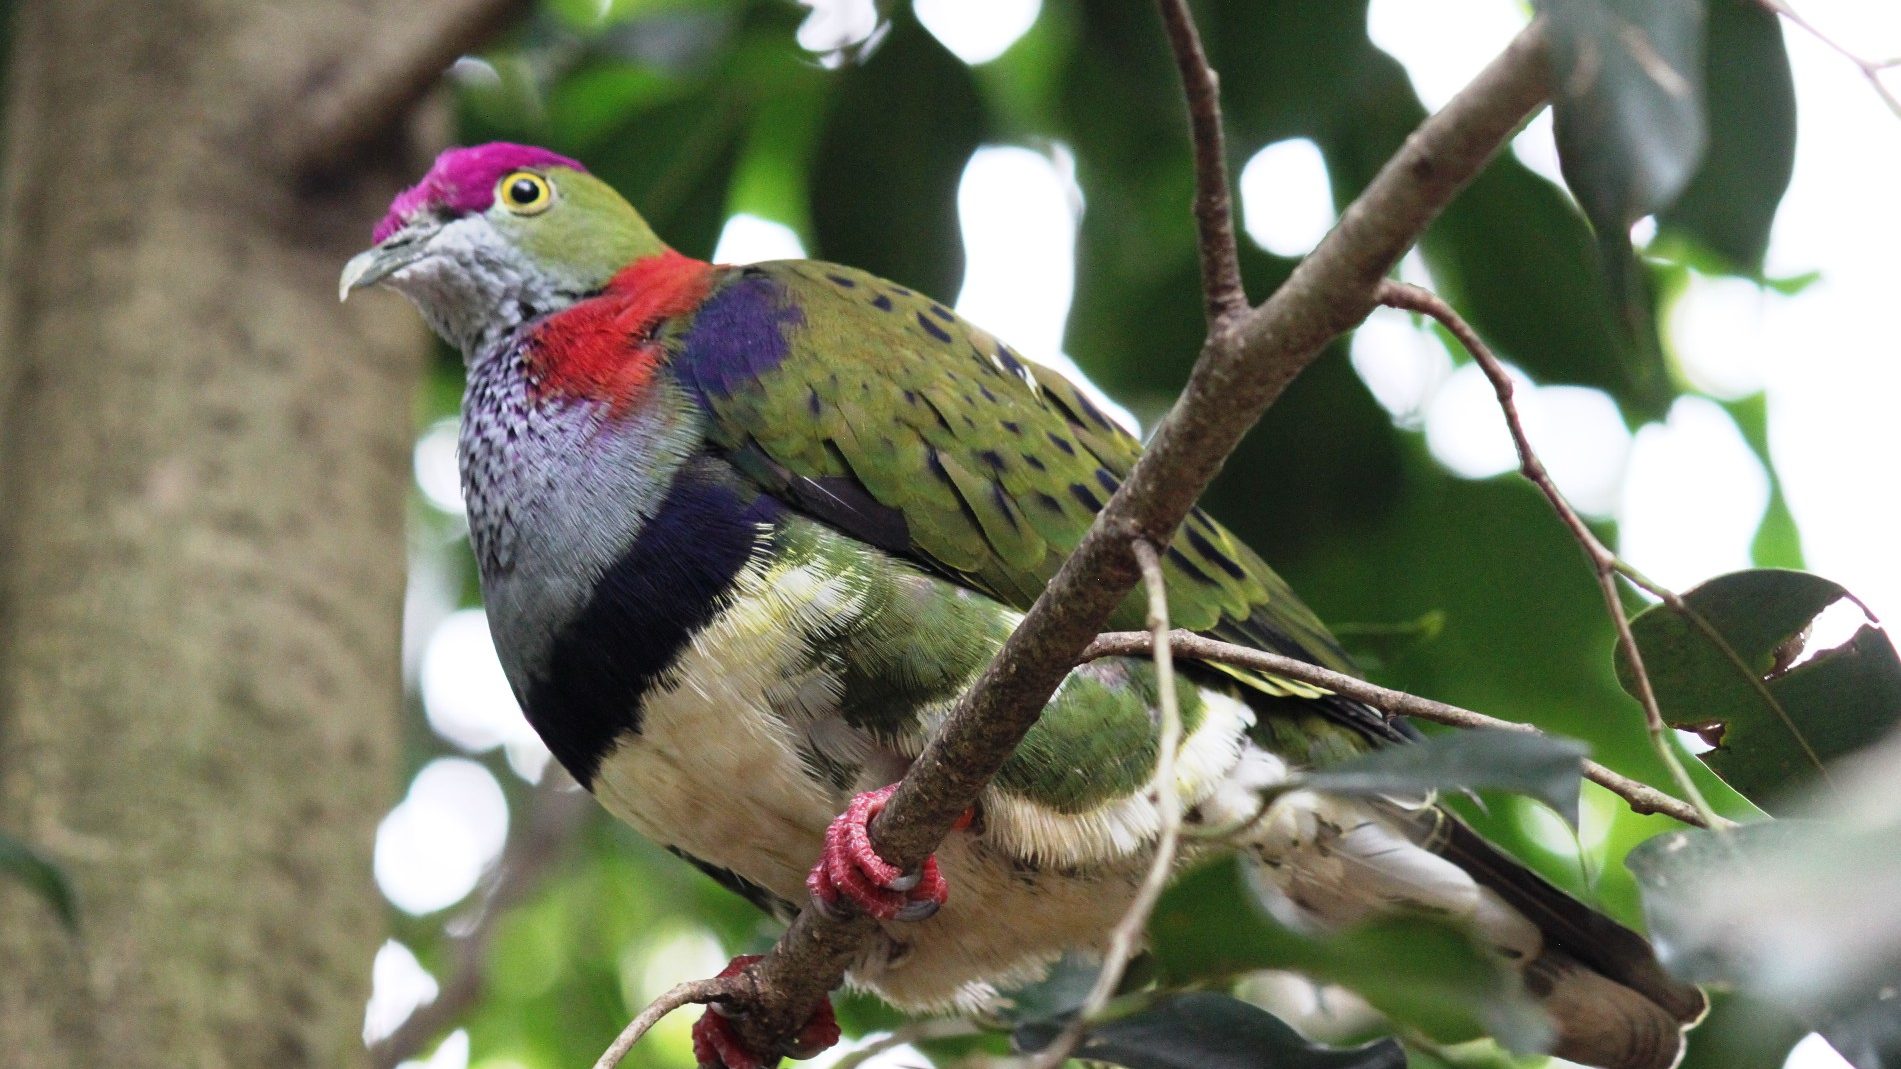 green, black, orange and pink dove in a tree